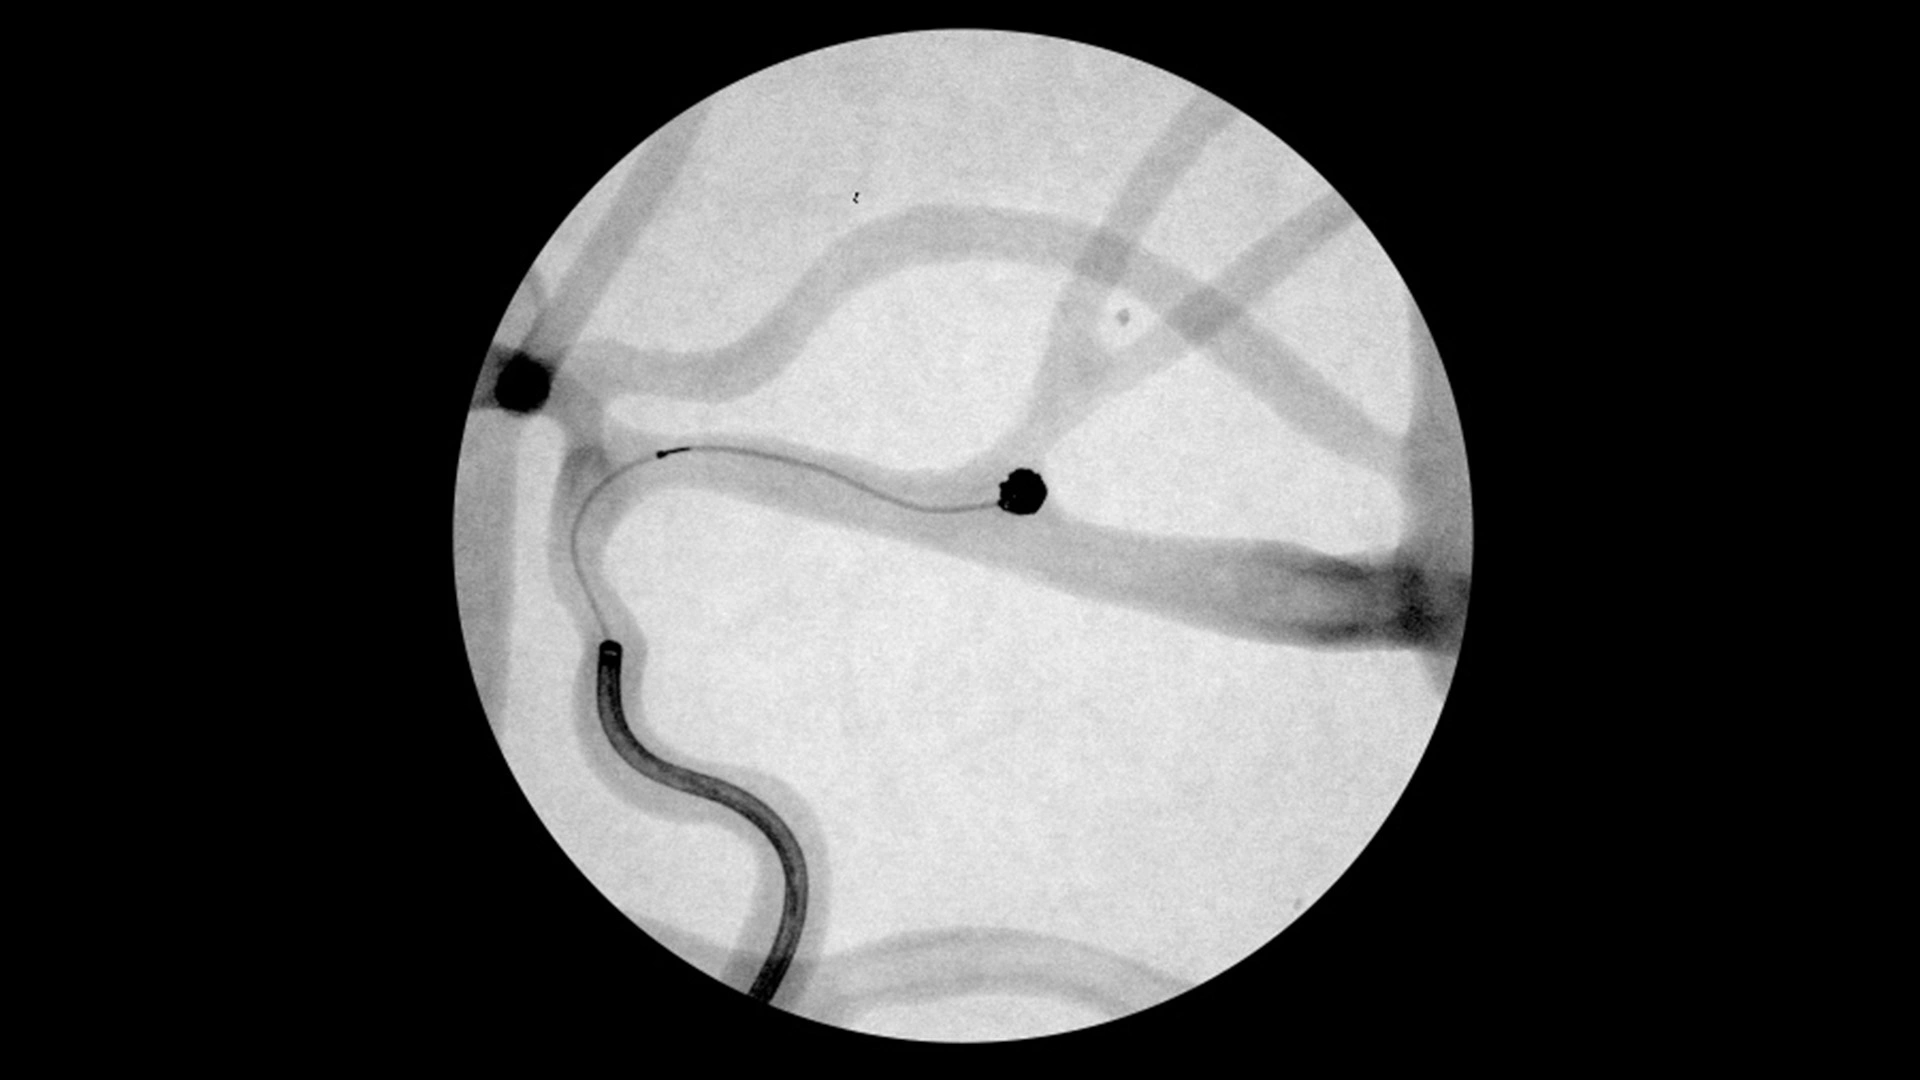 Angiogram of a Small Aneurysm Framed with SMART COIL